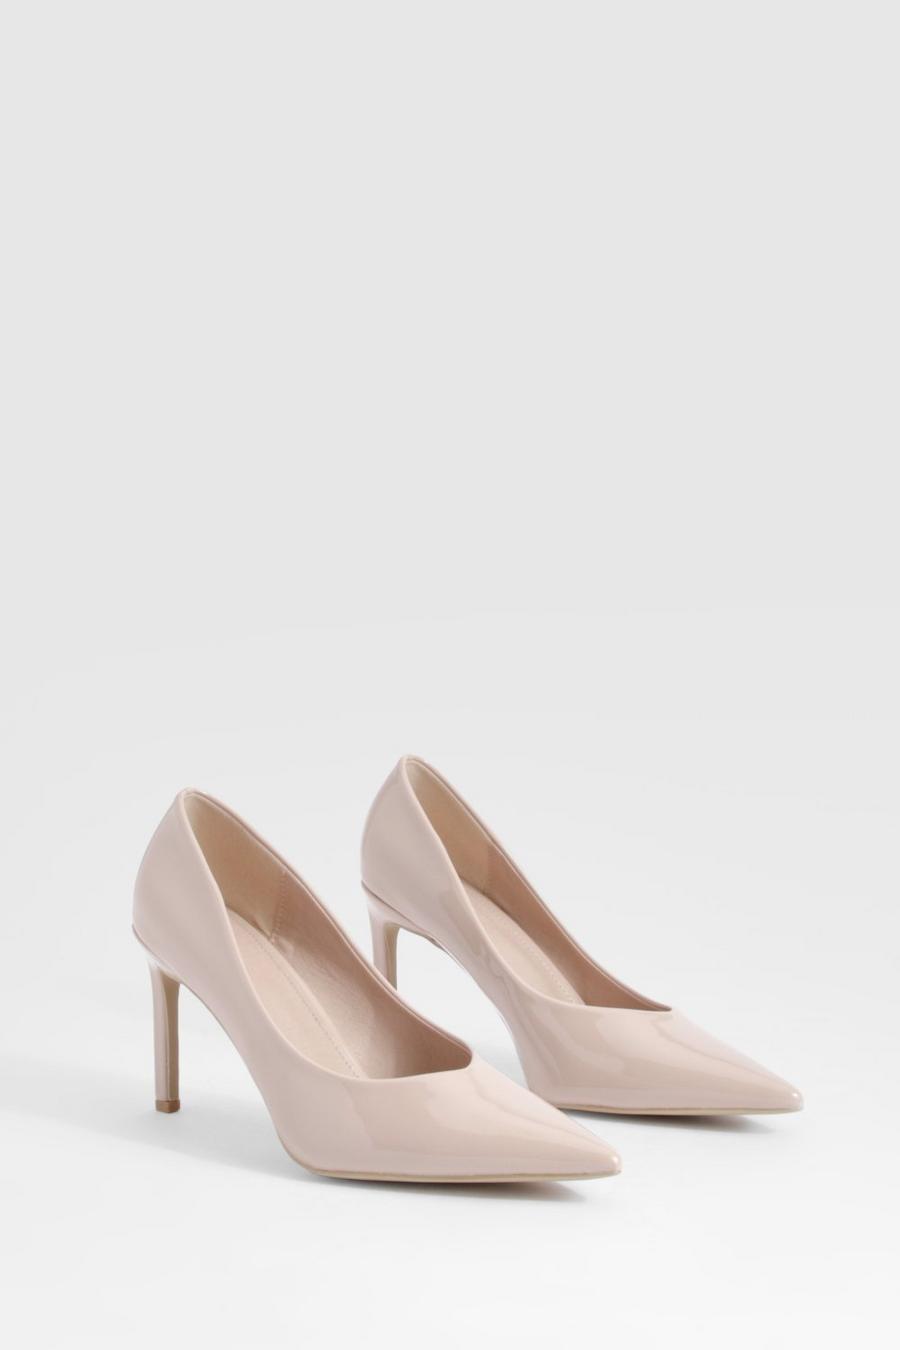 Nude Patent Pointed Pumps